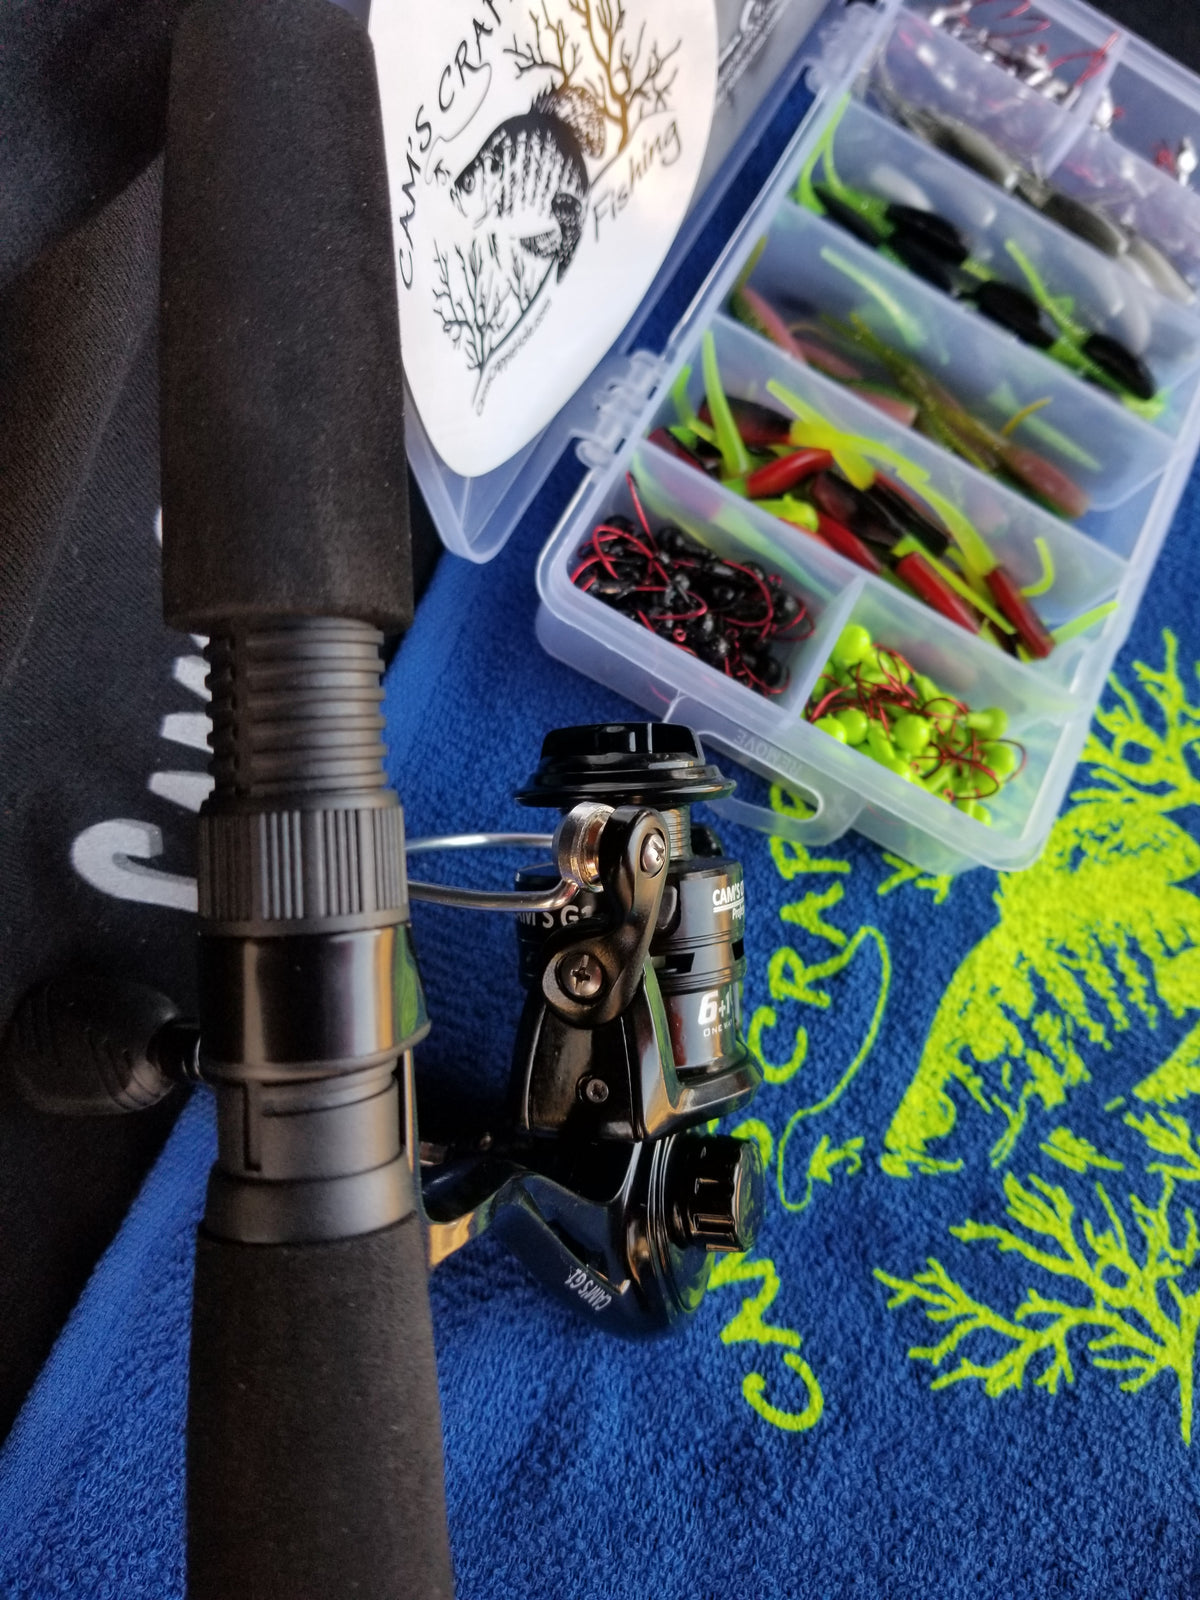 Cam's The Raven Complete 6ft. [BlackBird] Xtralite 7 (BB) Ball Bearing Reel Stinger Shad Combo Special